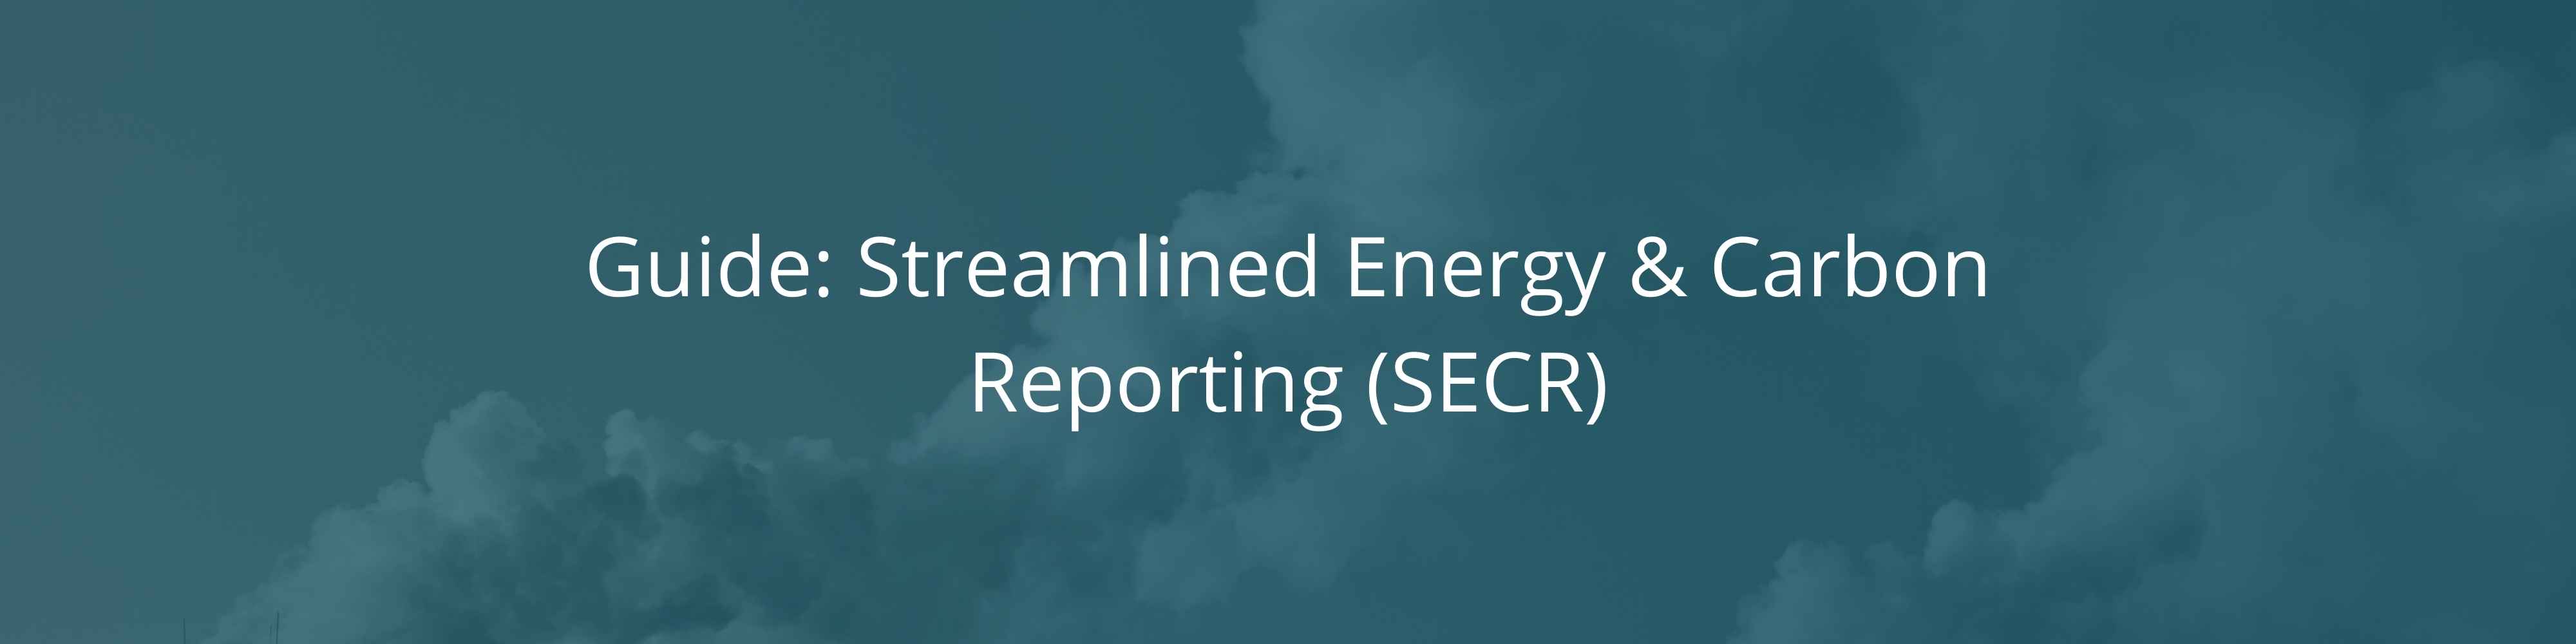 Streamlined Energy & Carbon Reporting (SECR) Guide